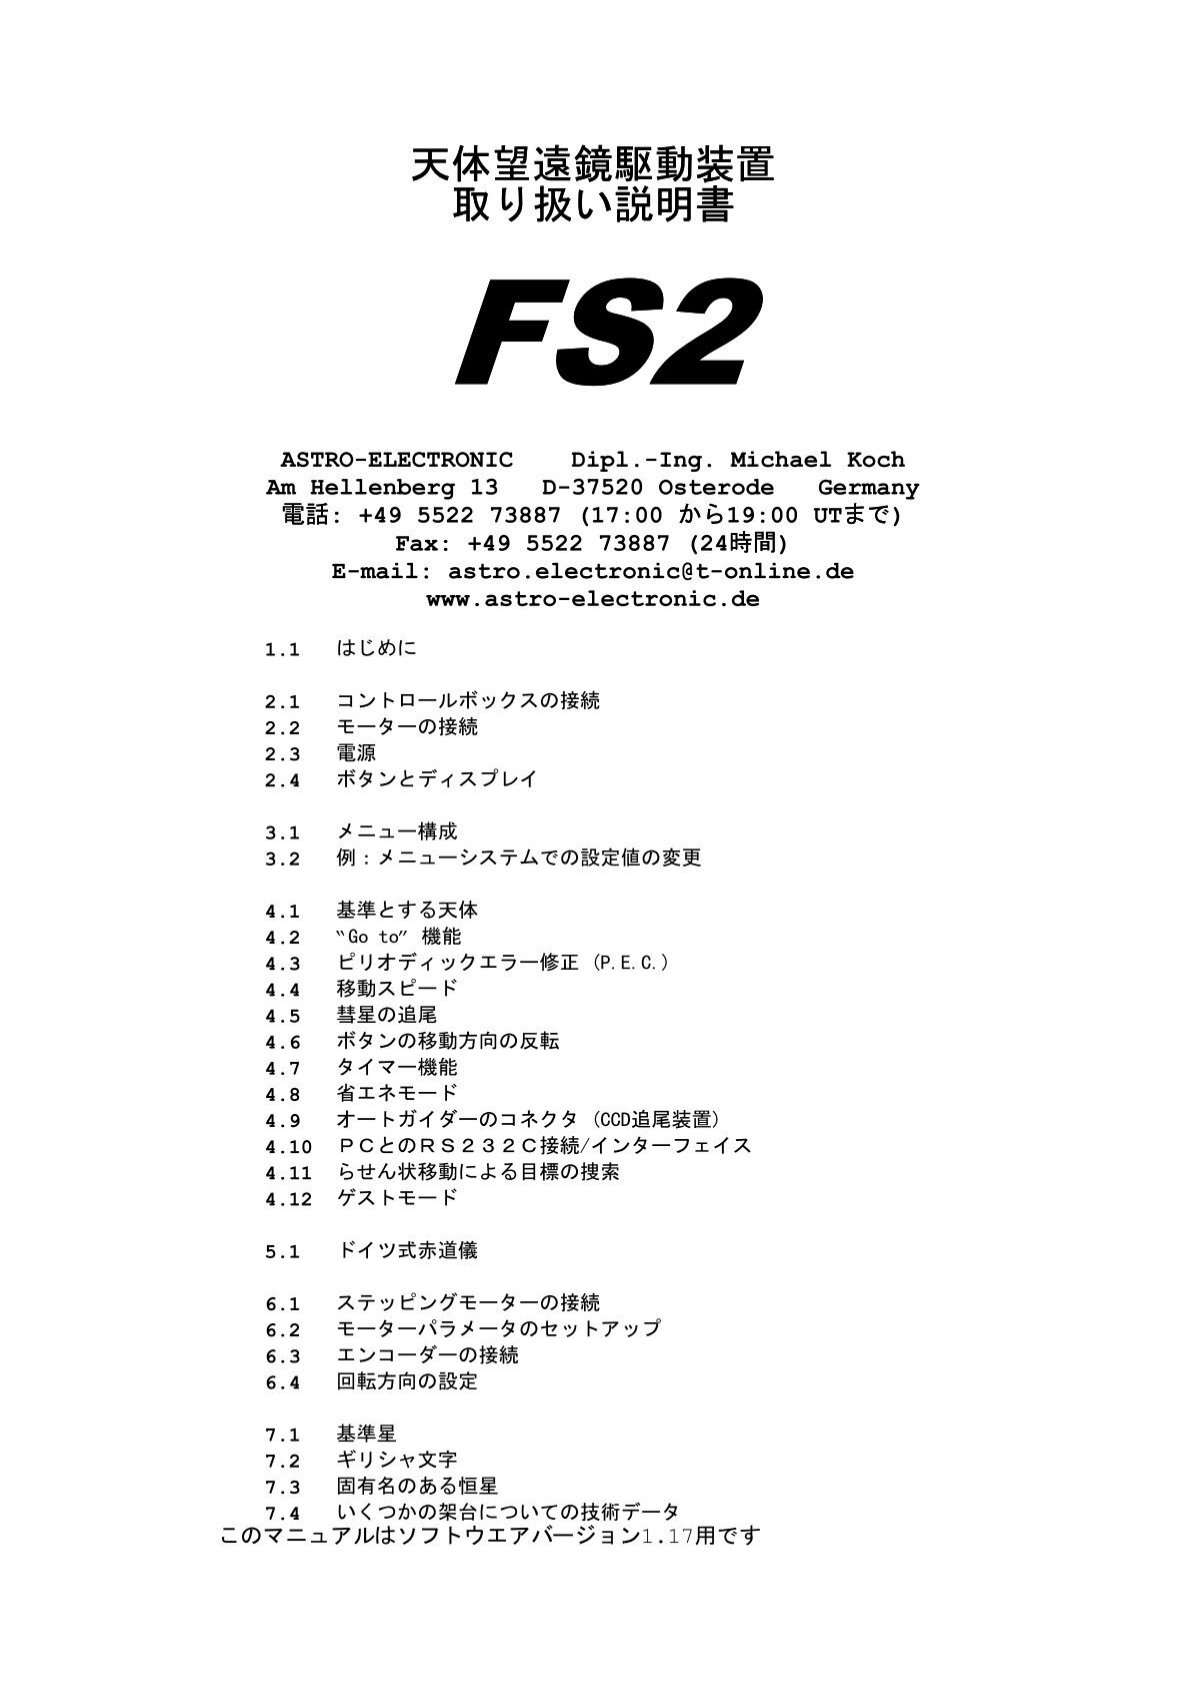 Download Japanese Fs2 Instruction Manual Pdf Astro Electronic